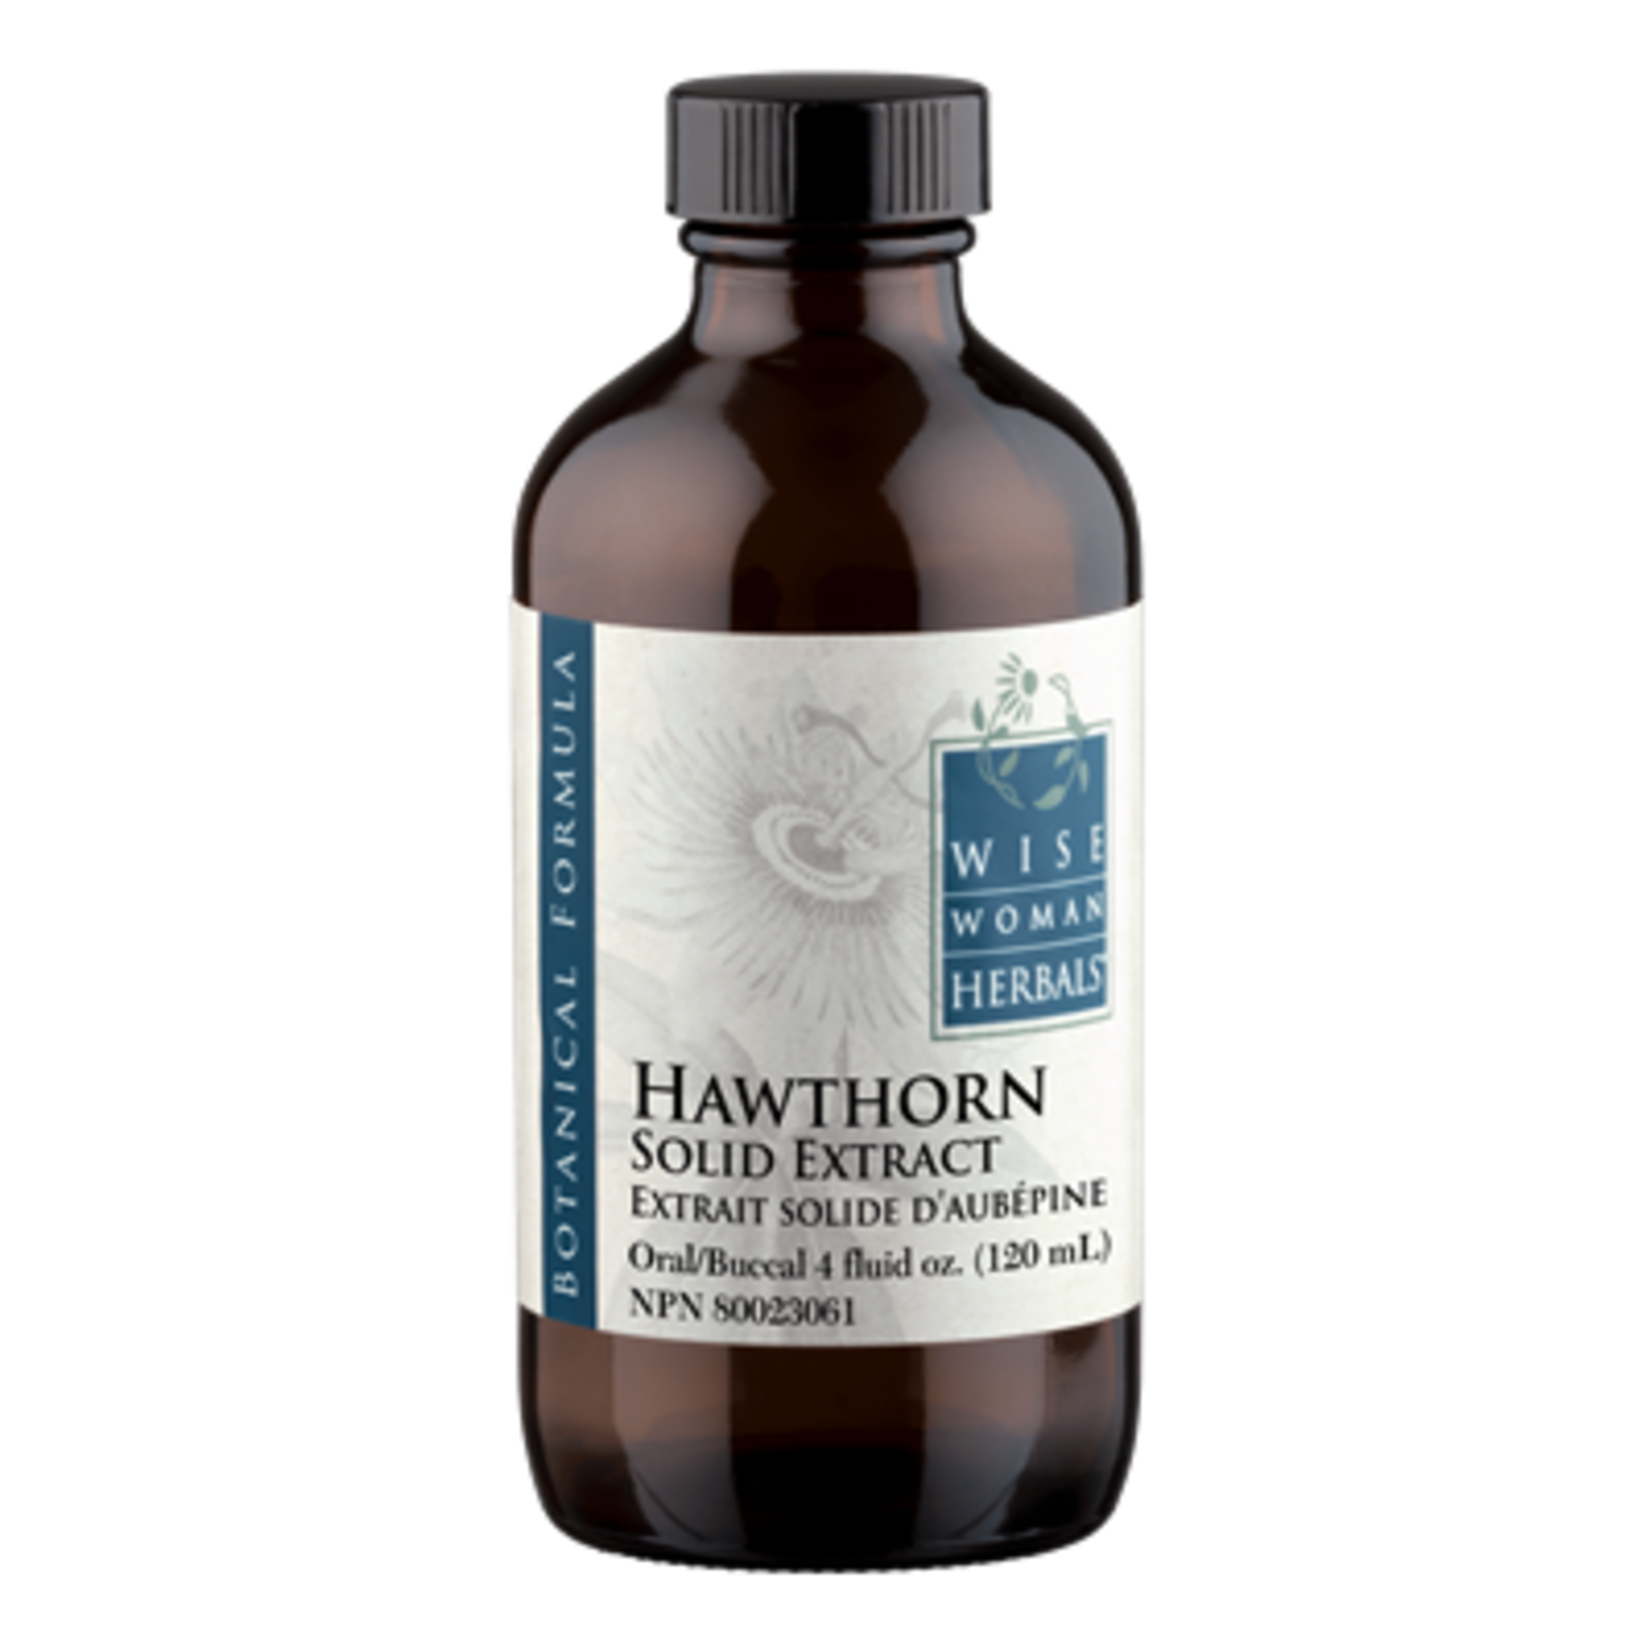 WISE WOMAN HERBALS WISE WOMAN HERBALS HAWTHORNE SOLID EXTRACT 112ML